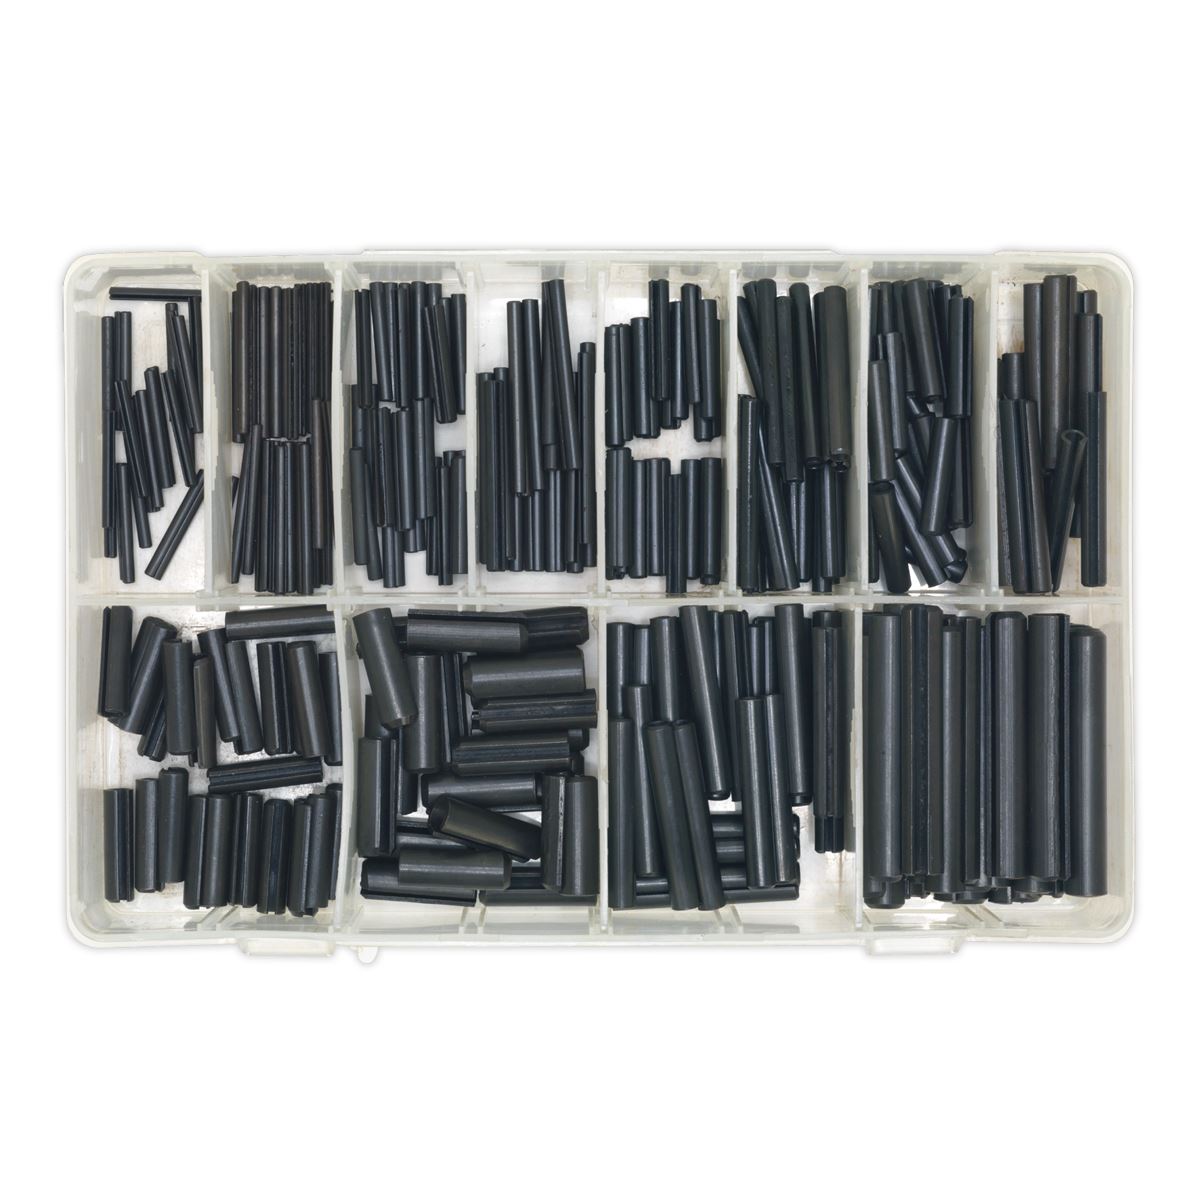 Sealey Spring Roll Pin Assortment 300pc - Metric